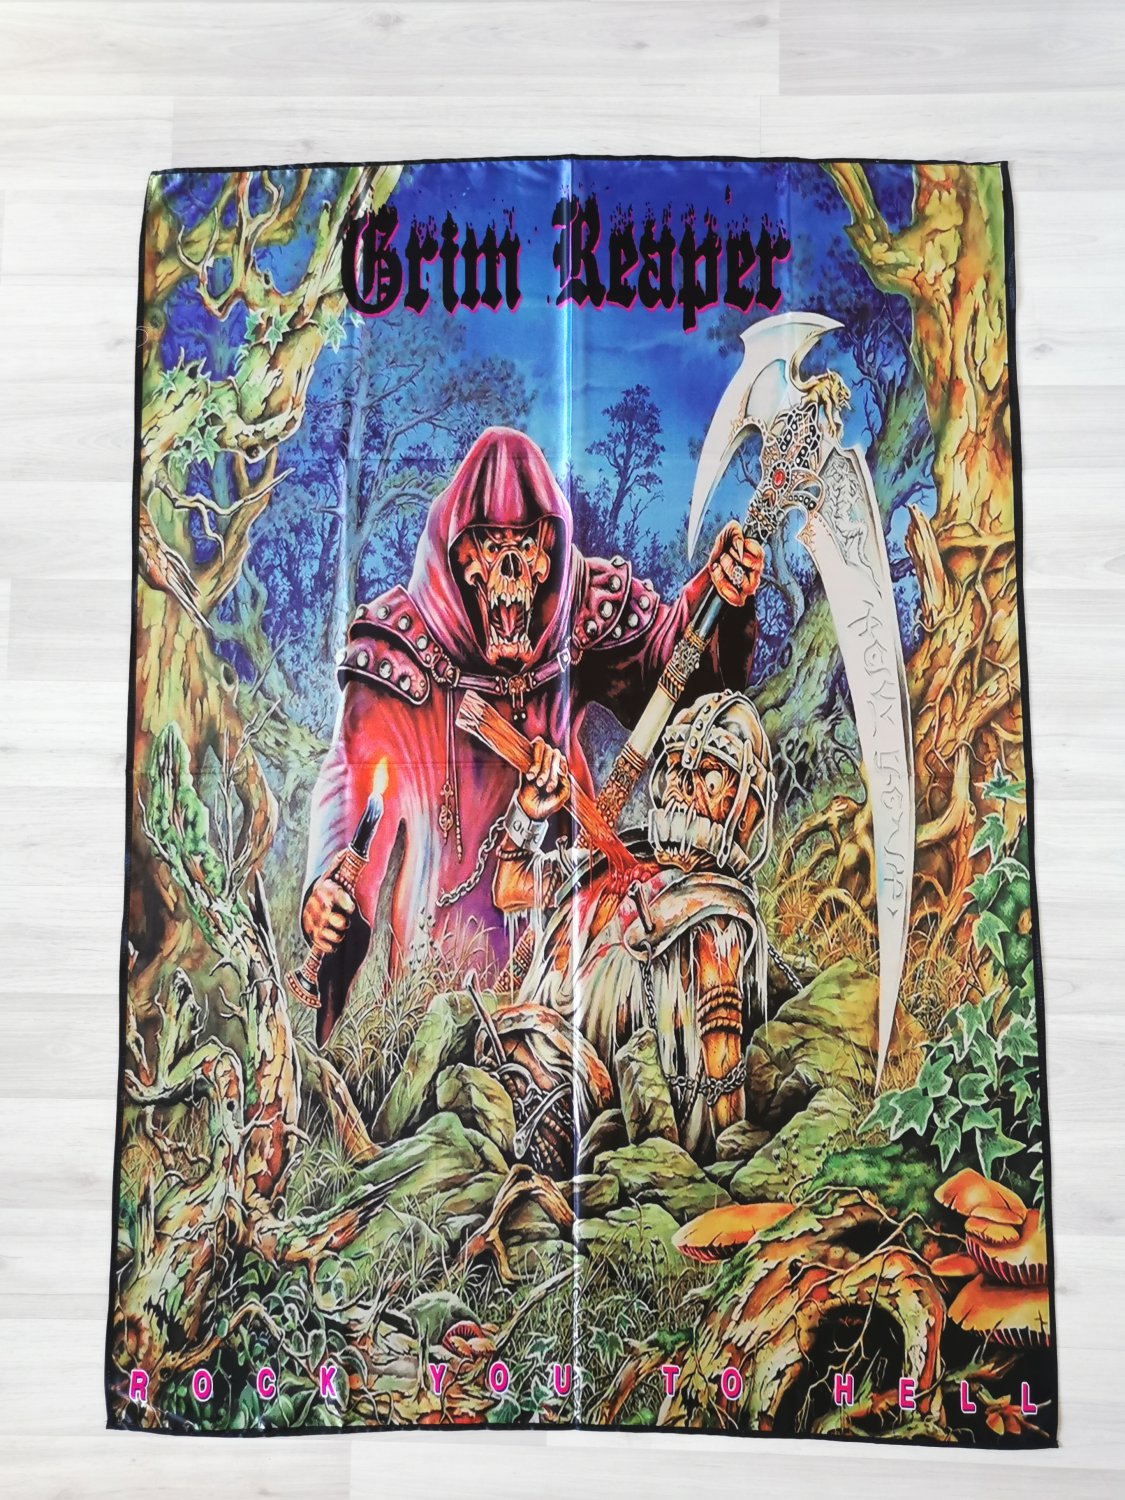 GRIM REAPER - Rock you to hell FLAG Heavy metal cloth poster NWOBHM